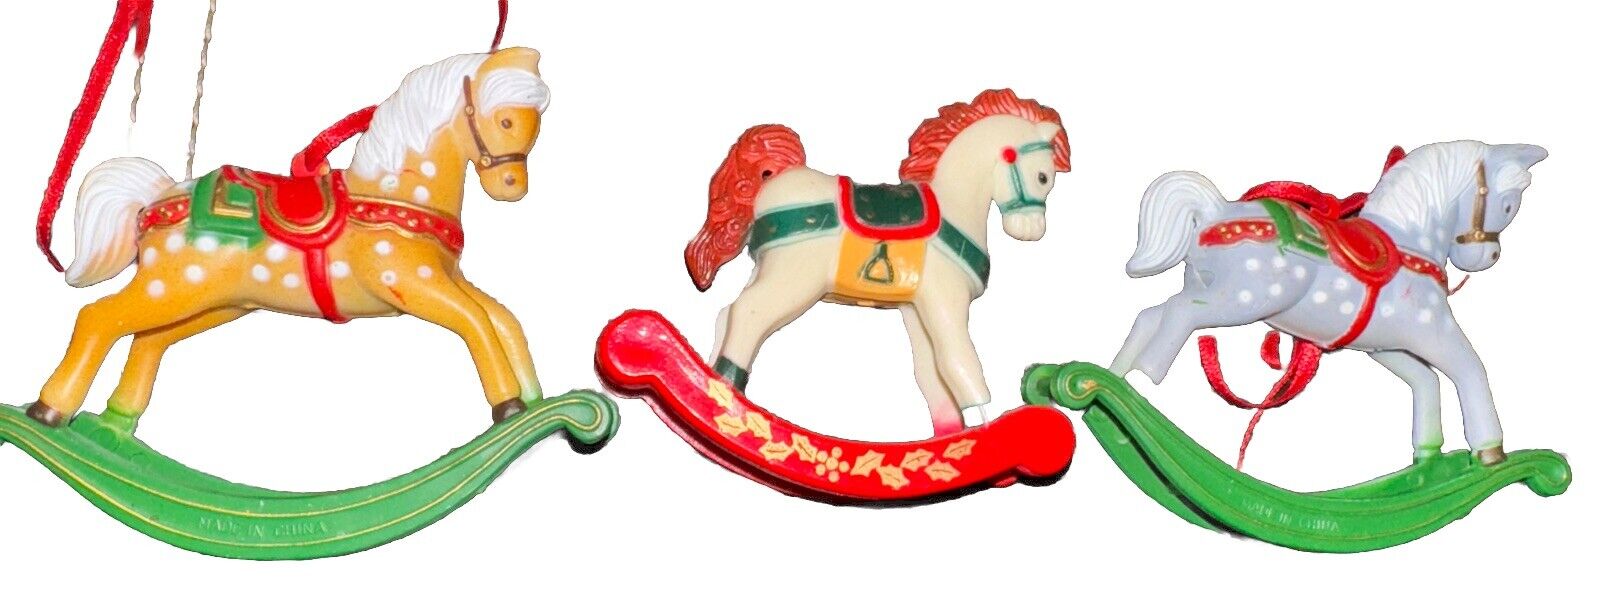 Lot of 3 Vintage Rocking Horse Christmas Ornaments